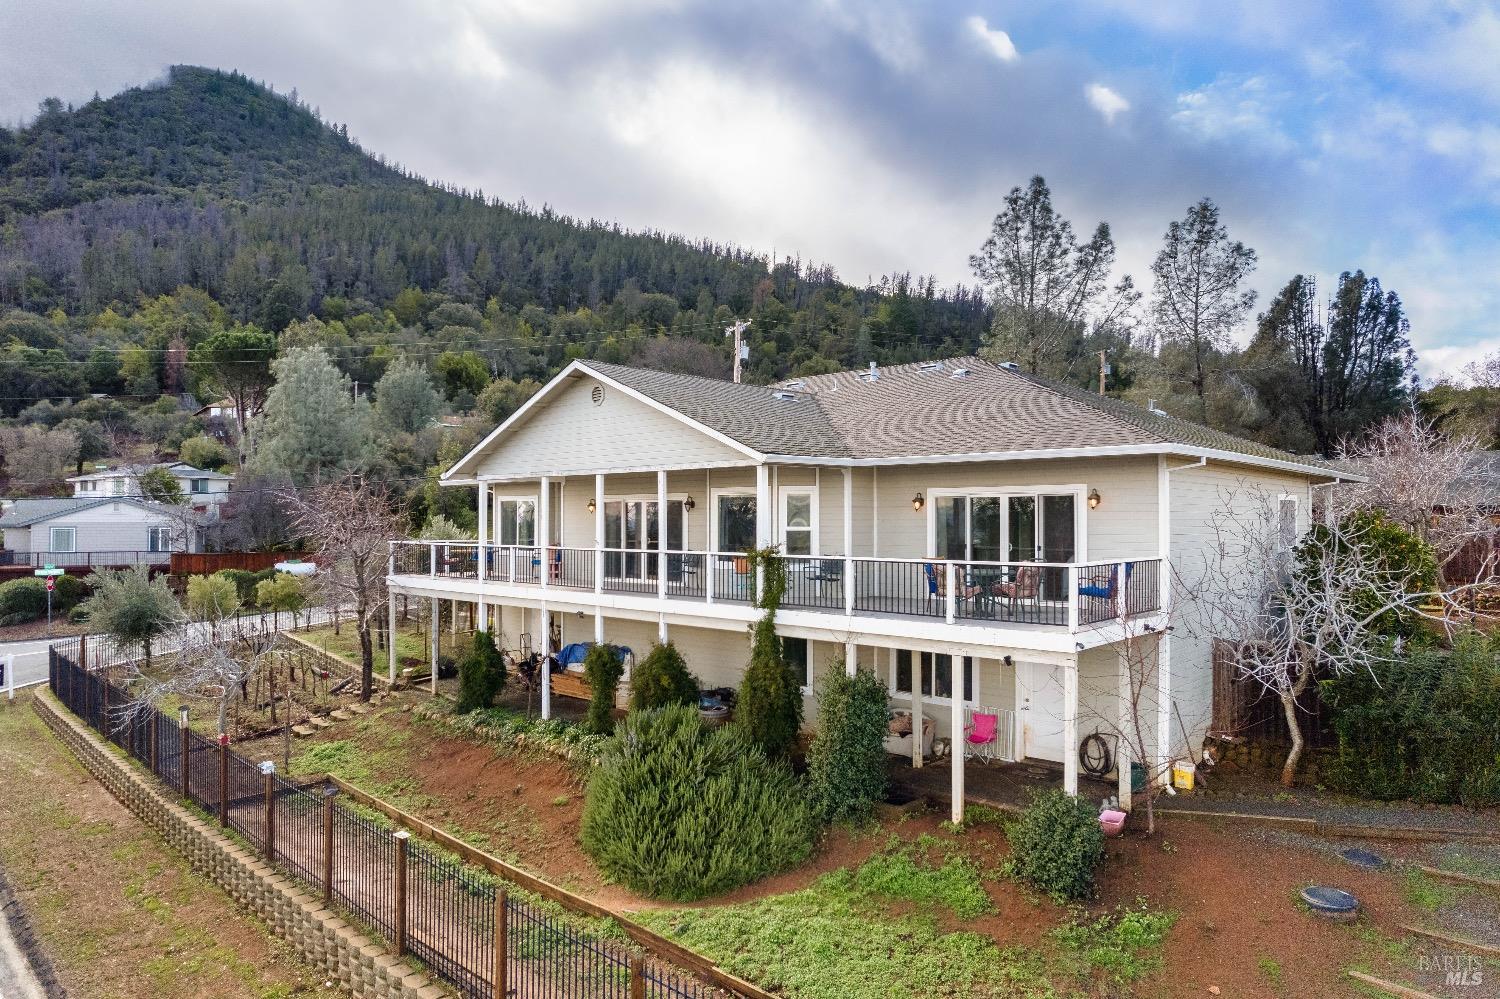 Photo of 3140 Riviera Heights Dr in Kelseyville, CA